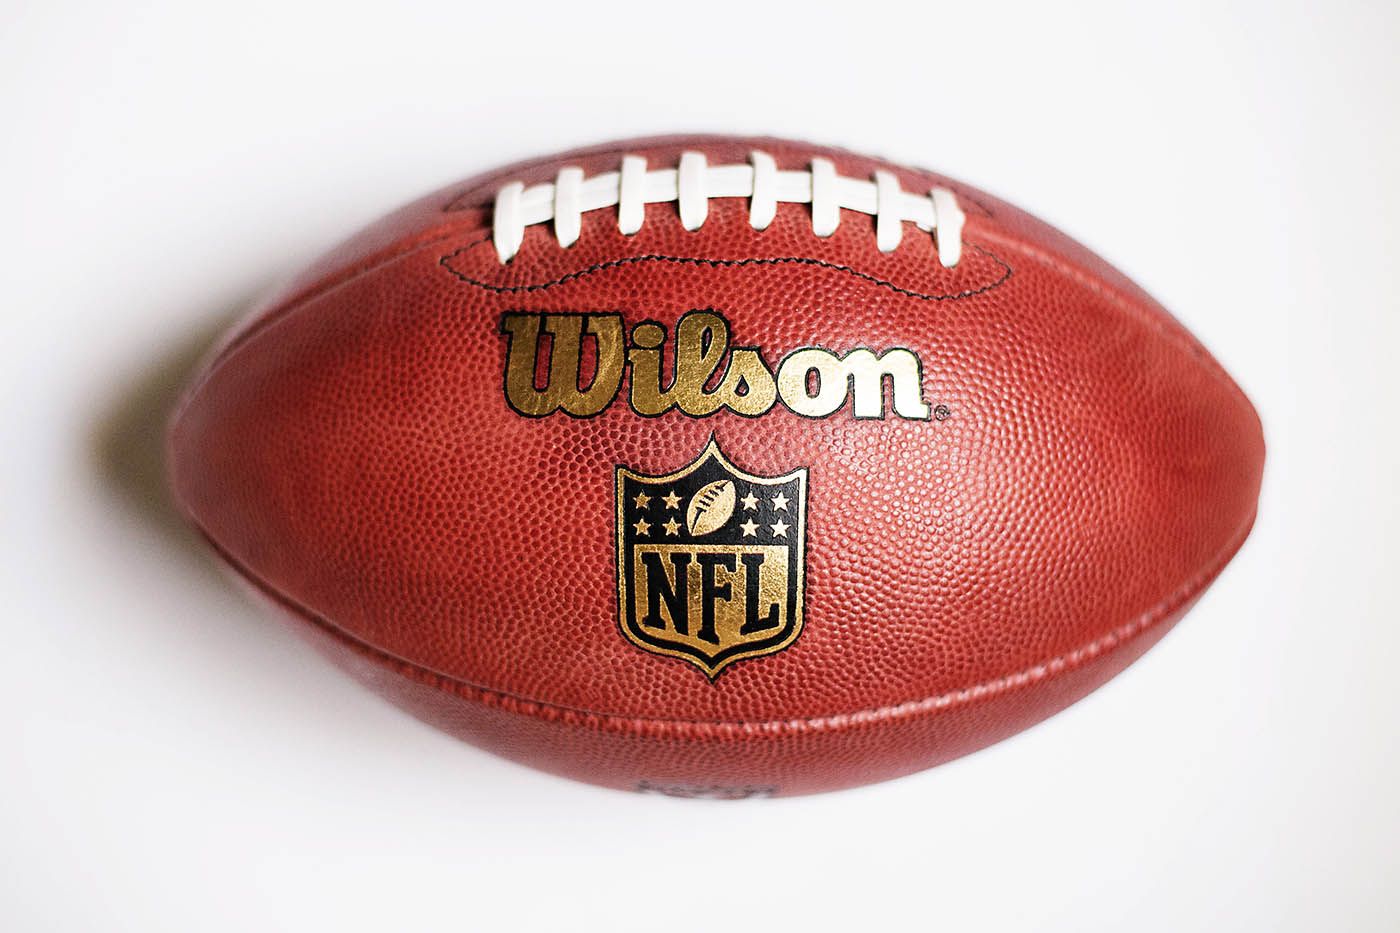 Father's Day gift + breakfast in bed perfect for any dad. LOVE the personalized football!